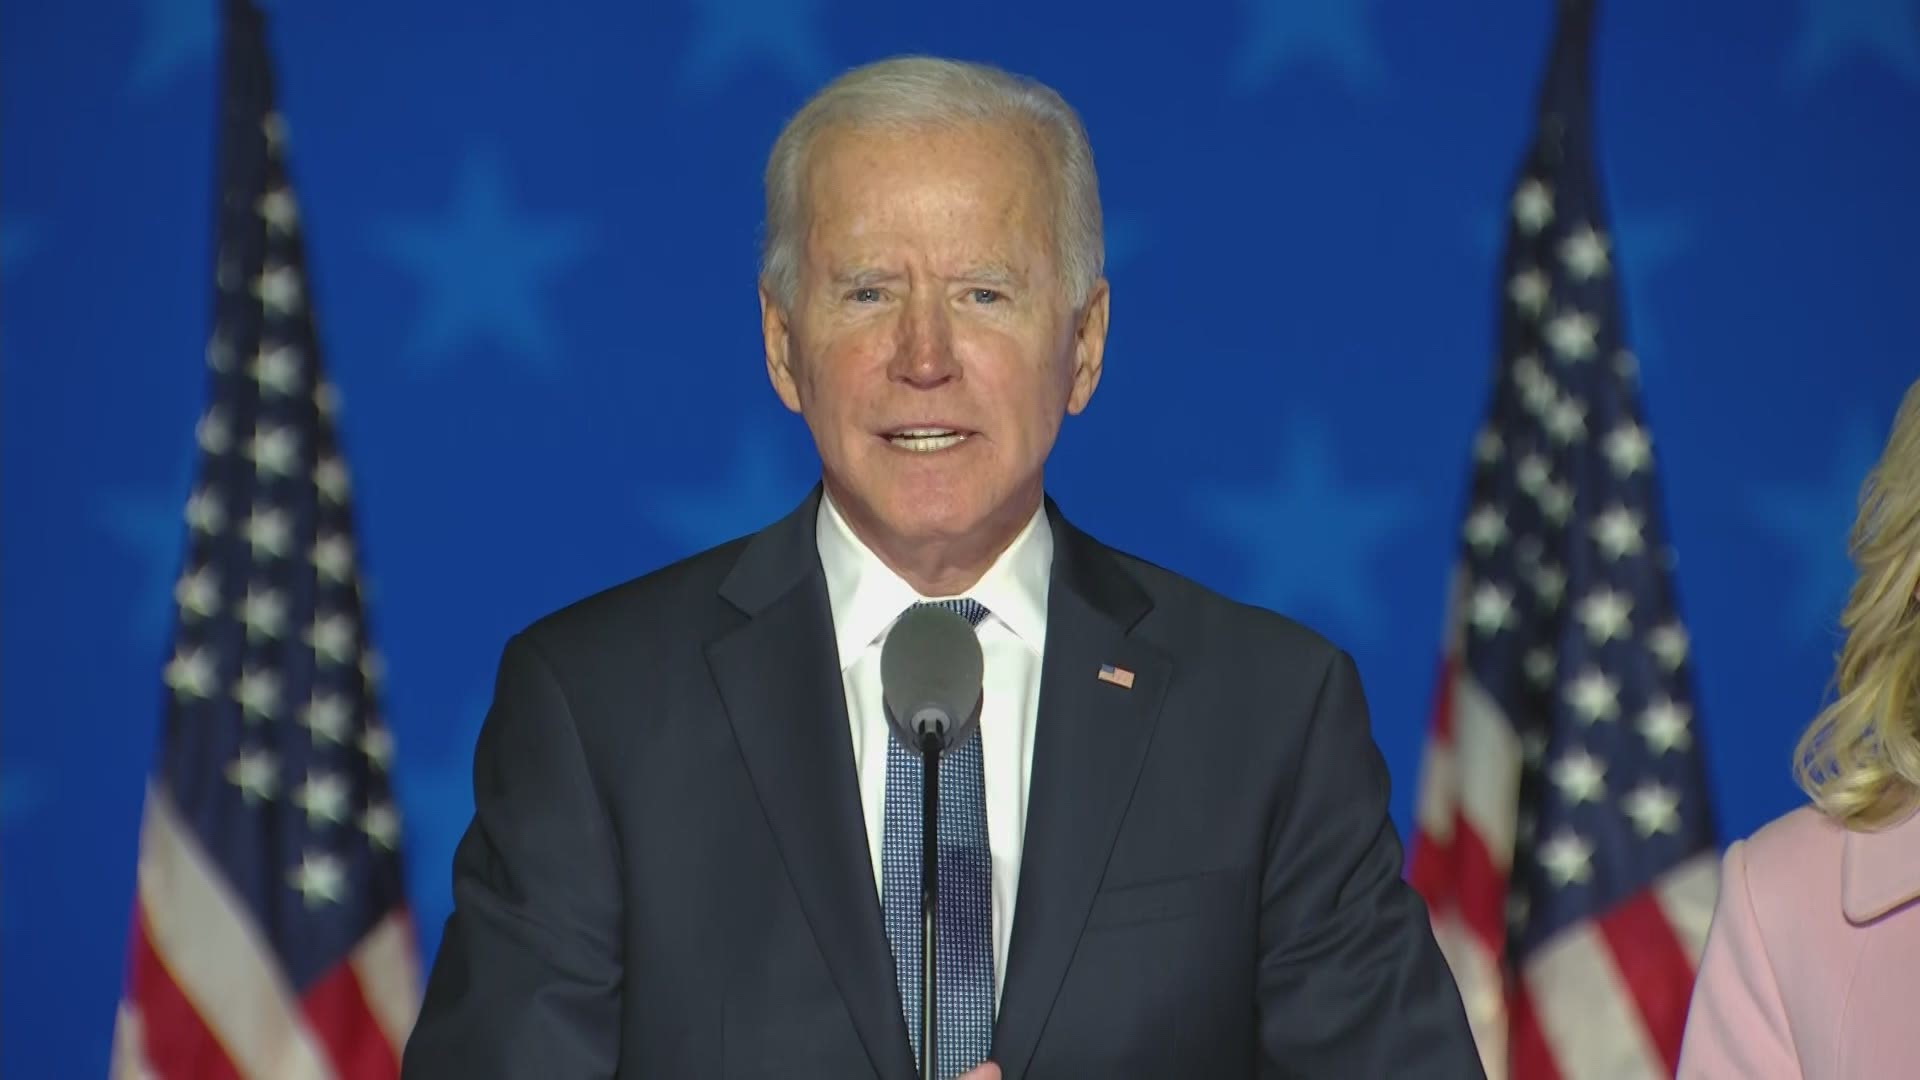 Joe Biden spoke to supporters in Wilmington, Del., early Wednesday morning as the presidential election remained too close to call.